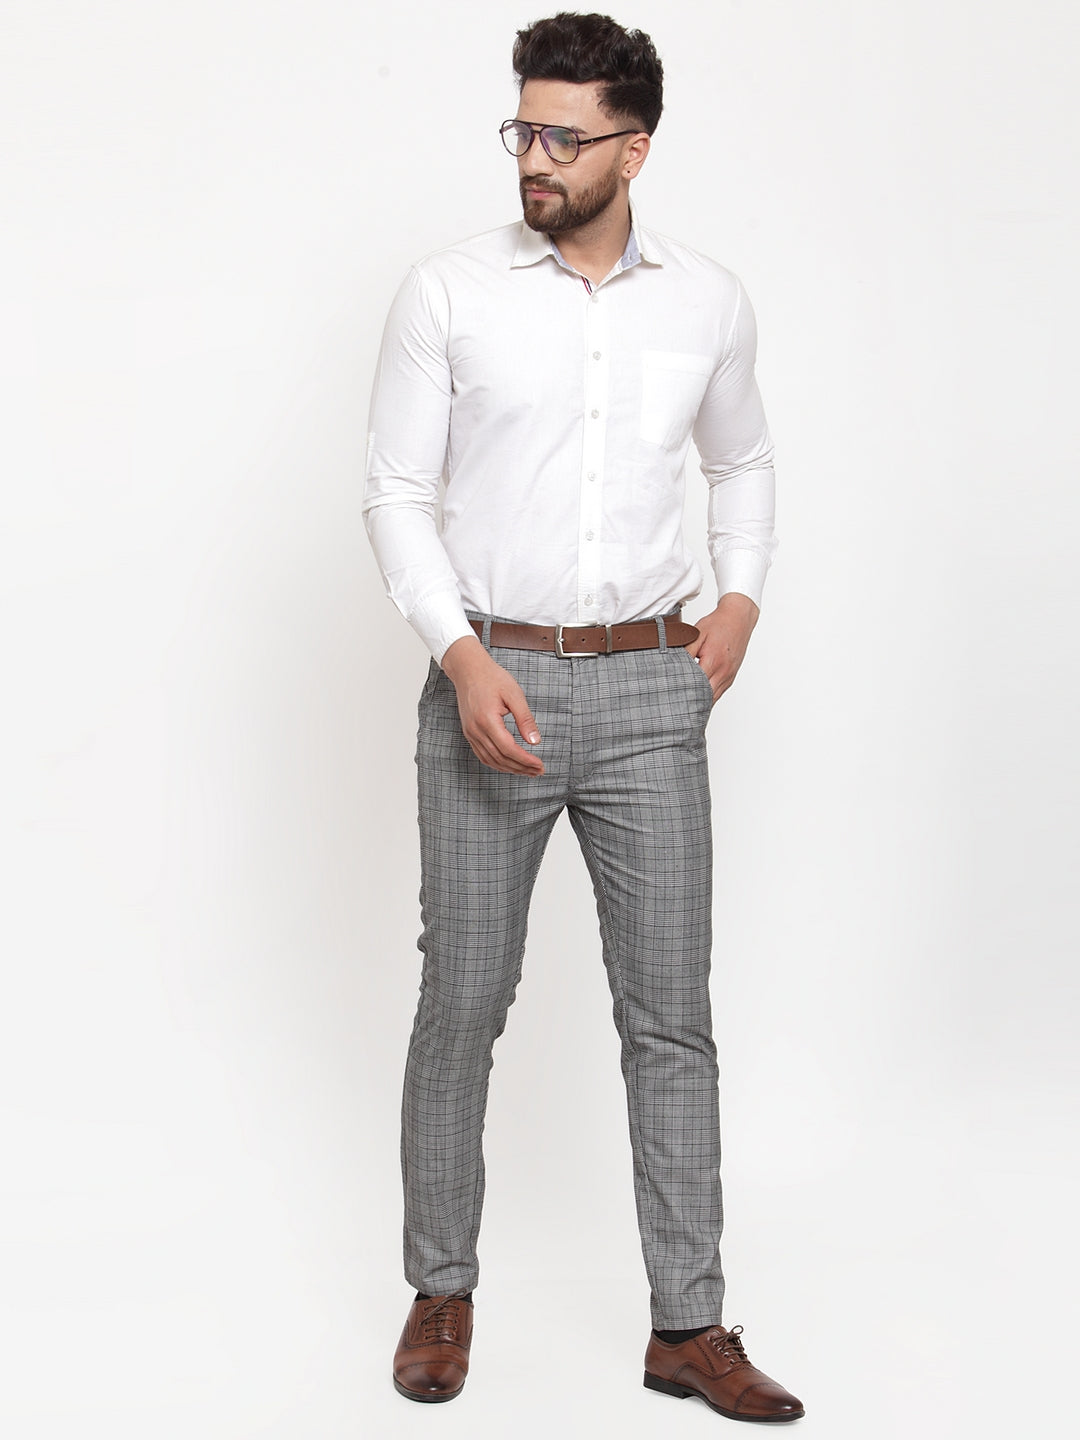 Trousers for Men | Formal, Casual, Cotton Fabric Trouser Online